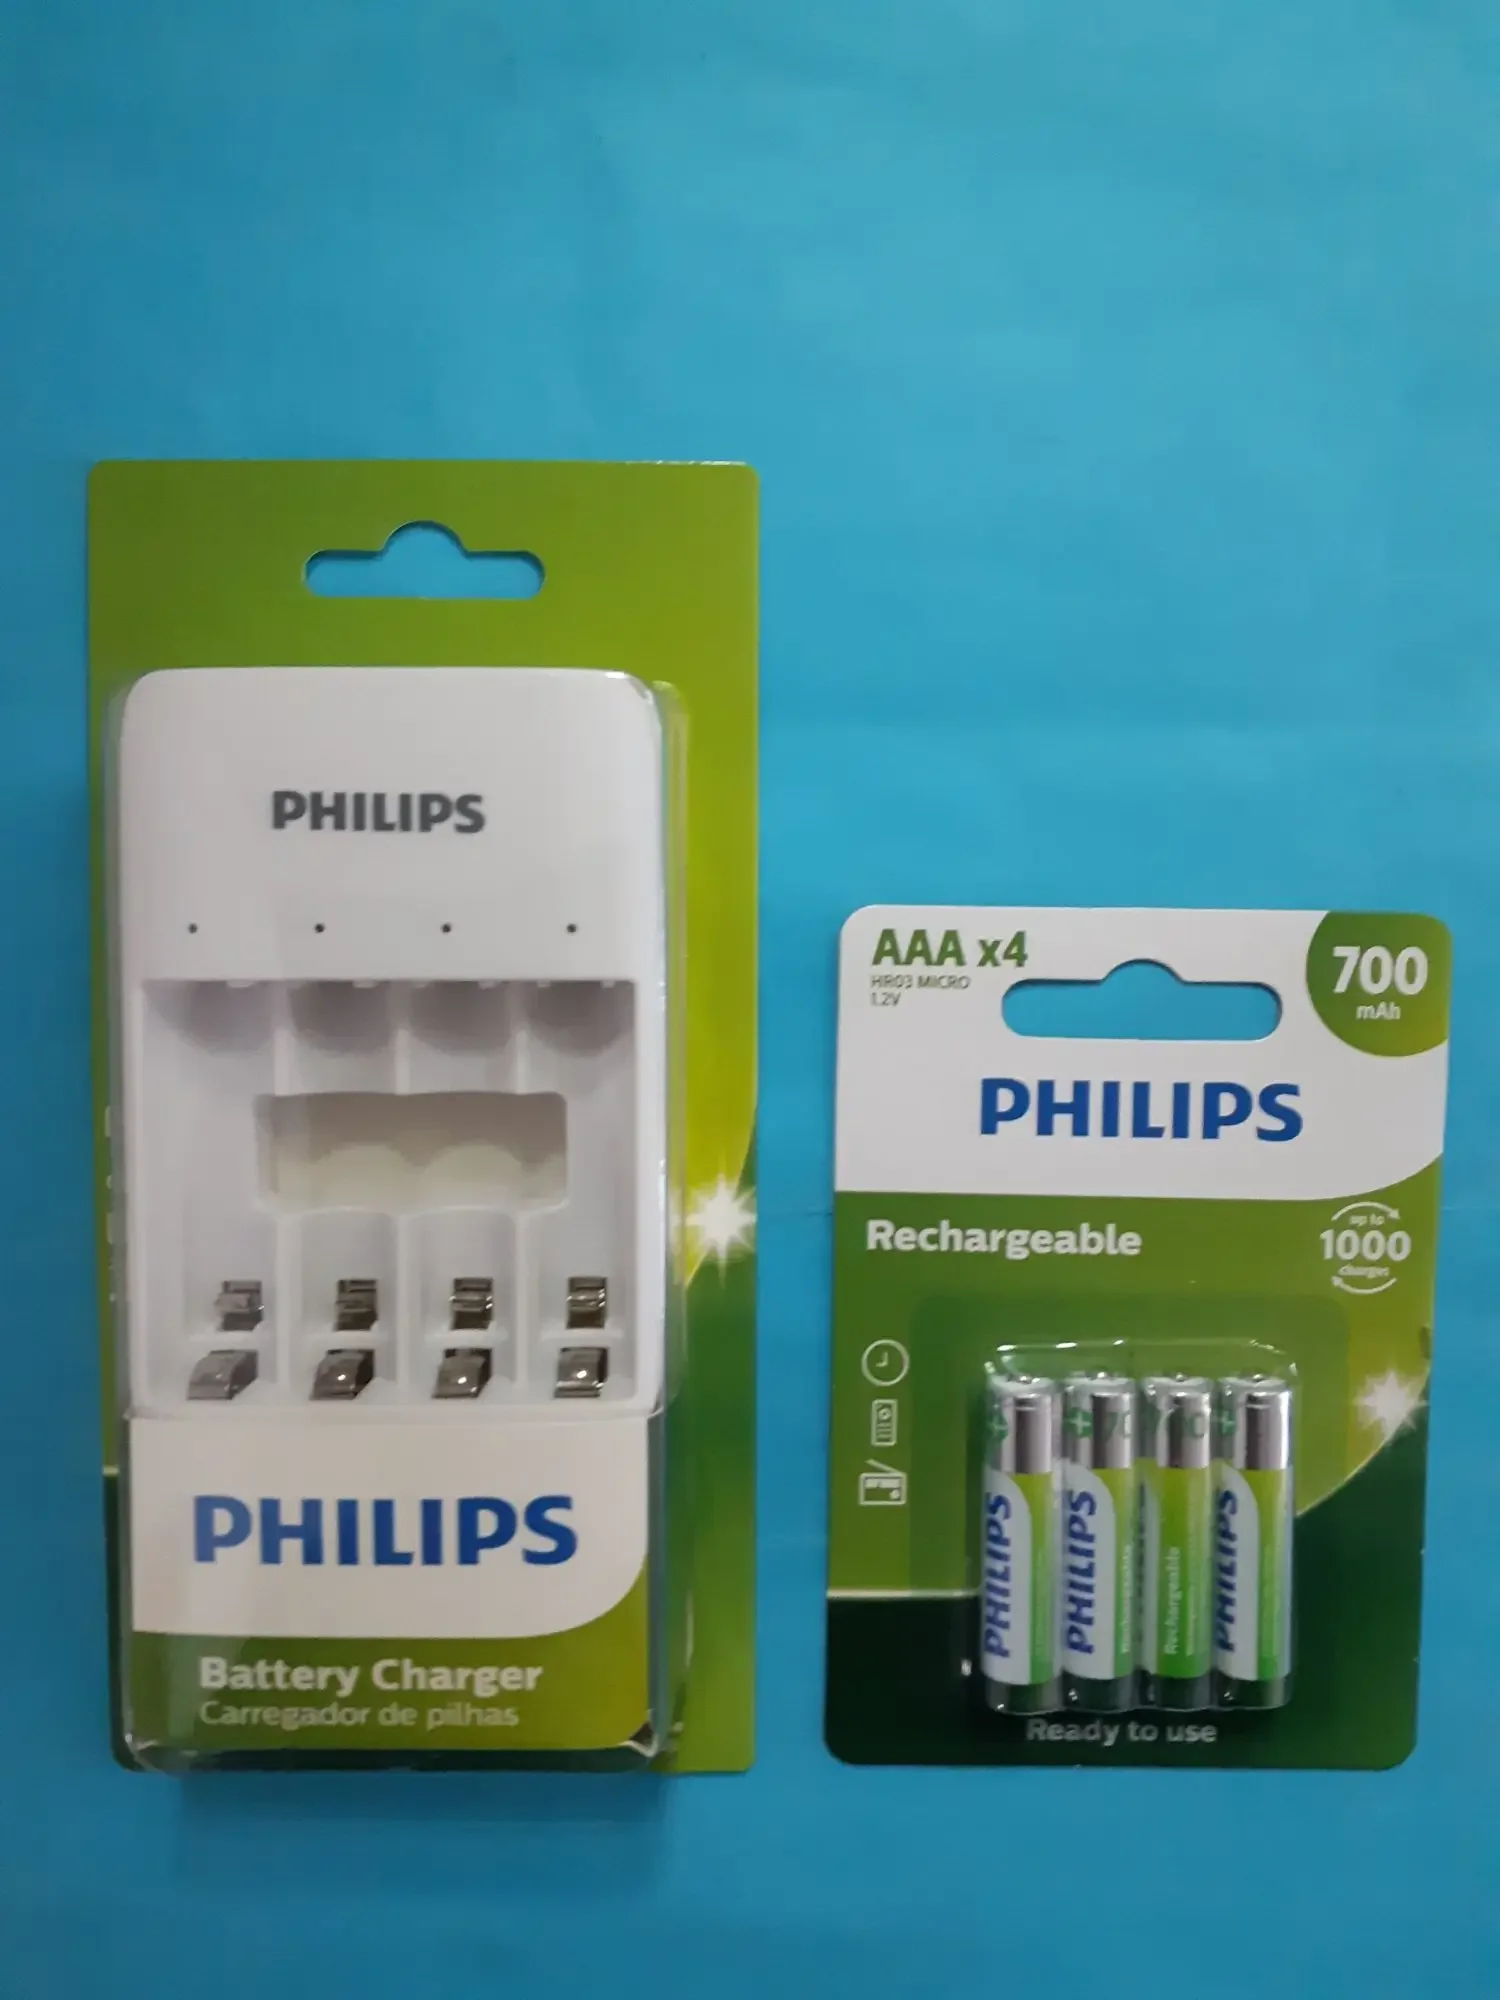 PHILIPS CHARGER (WORK WITH 4AA.4AAA ) Rechargeable batteries PLUS PHILIP RECHARGEABLE HR03 AAA 4 PIECES 700MAH 1.2V NIMH BATTERIES